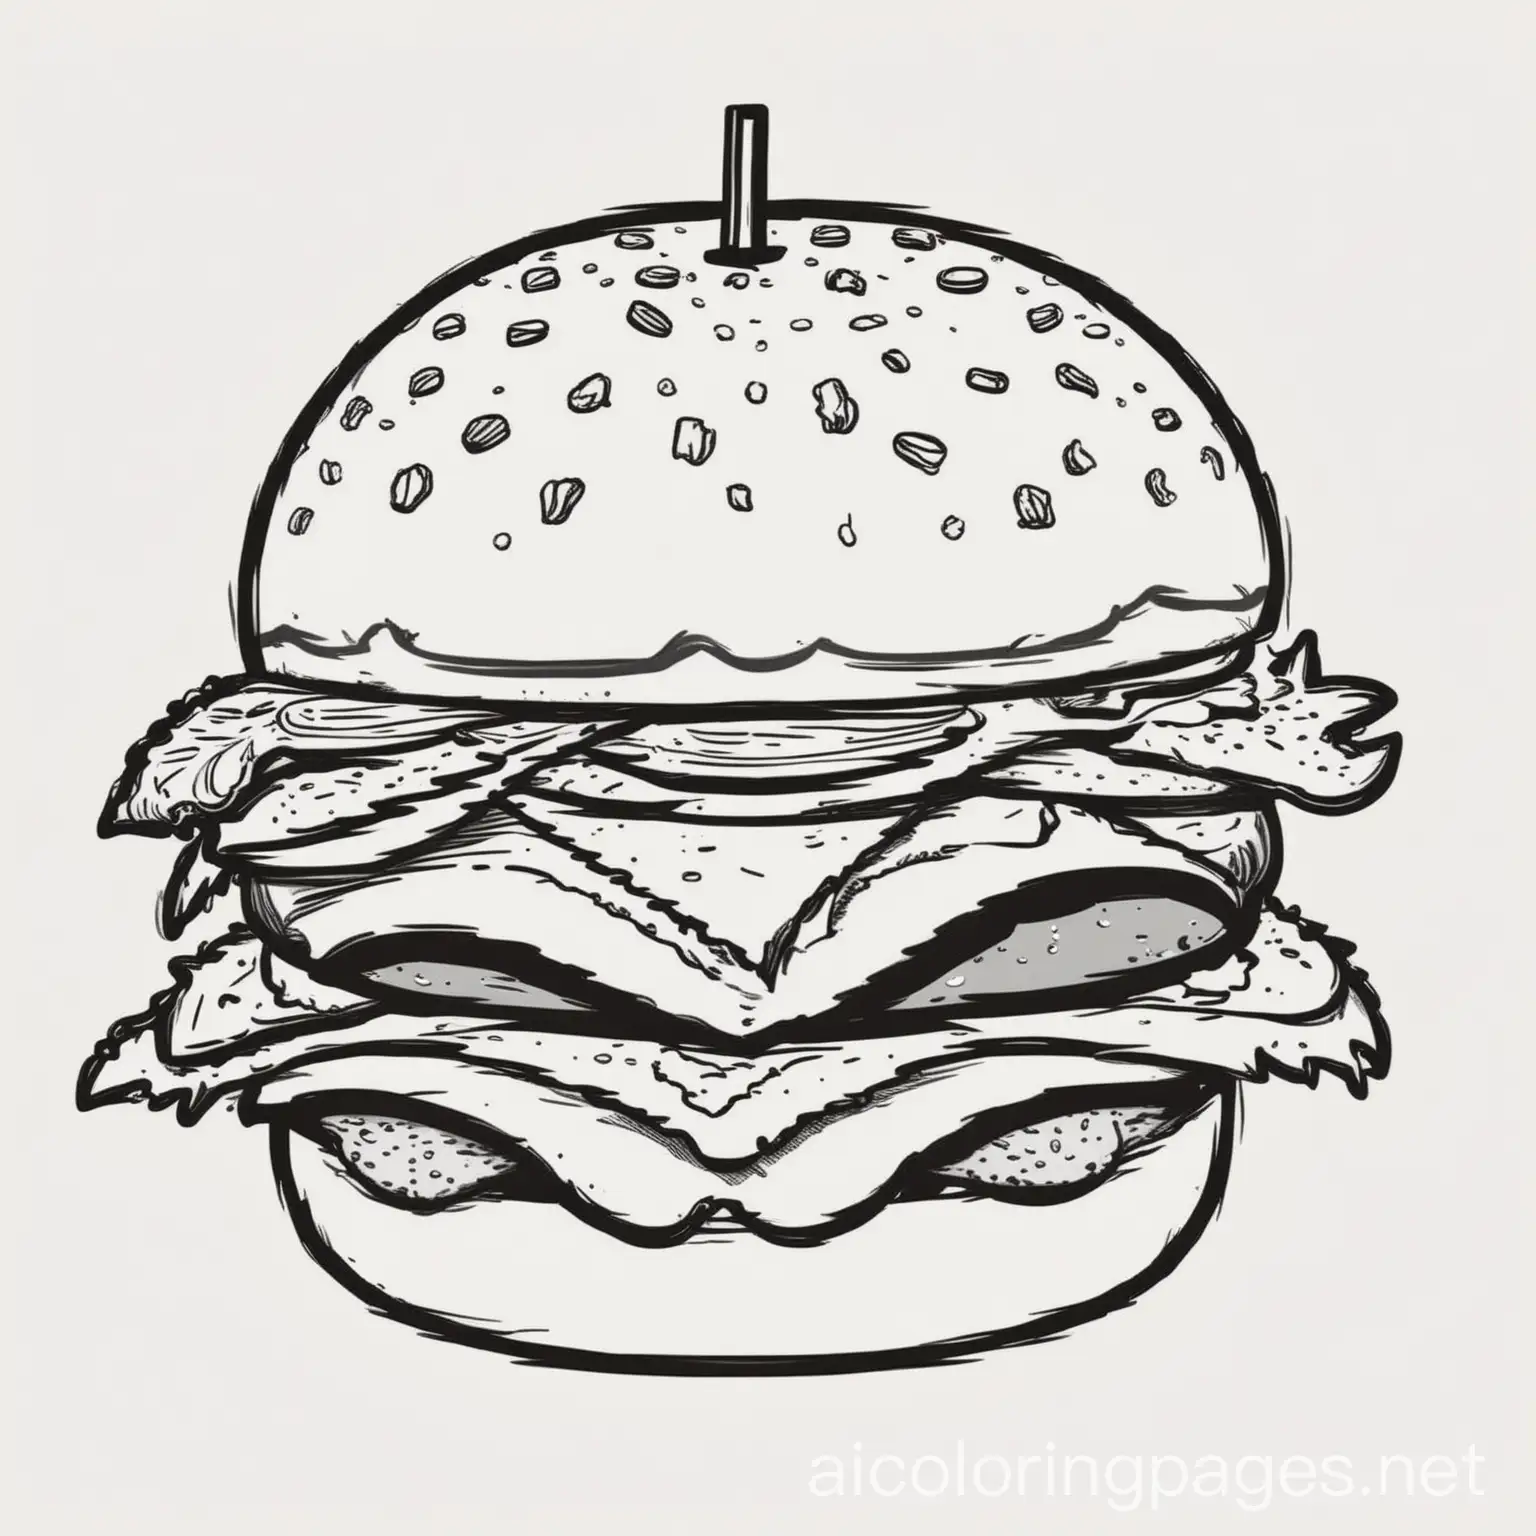 a cute nd simple burger for a cute coloring book for kids, Coloring Page, black and white, line art, white background, Simplicity, Ample White Space. The background of the coloring page is plain white to make it easy for young children to color within the lines. The outlines of all the subjects are easy to distinguish, making it simple for kids to color without too much difficulty